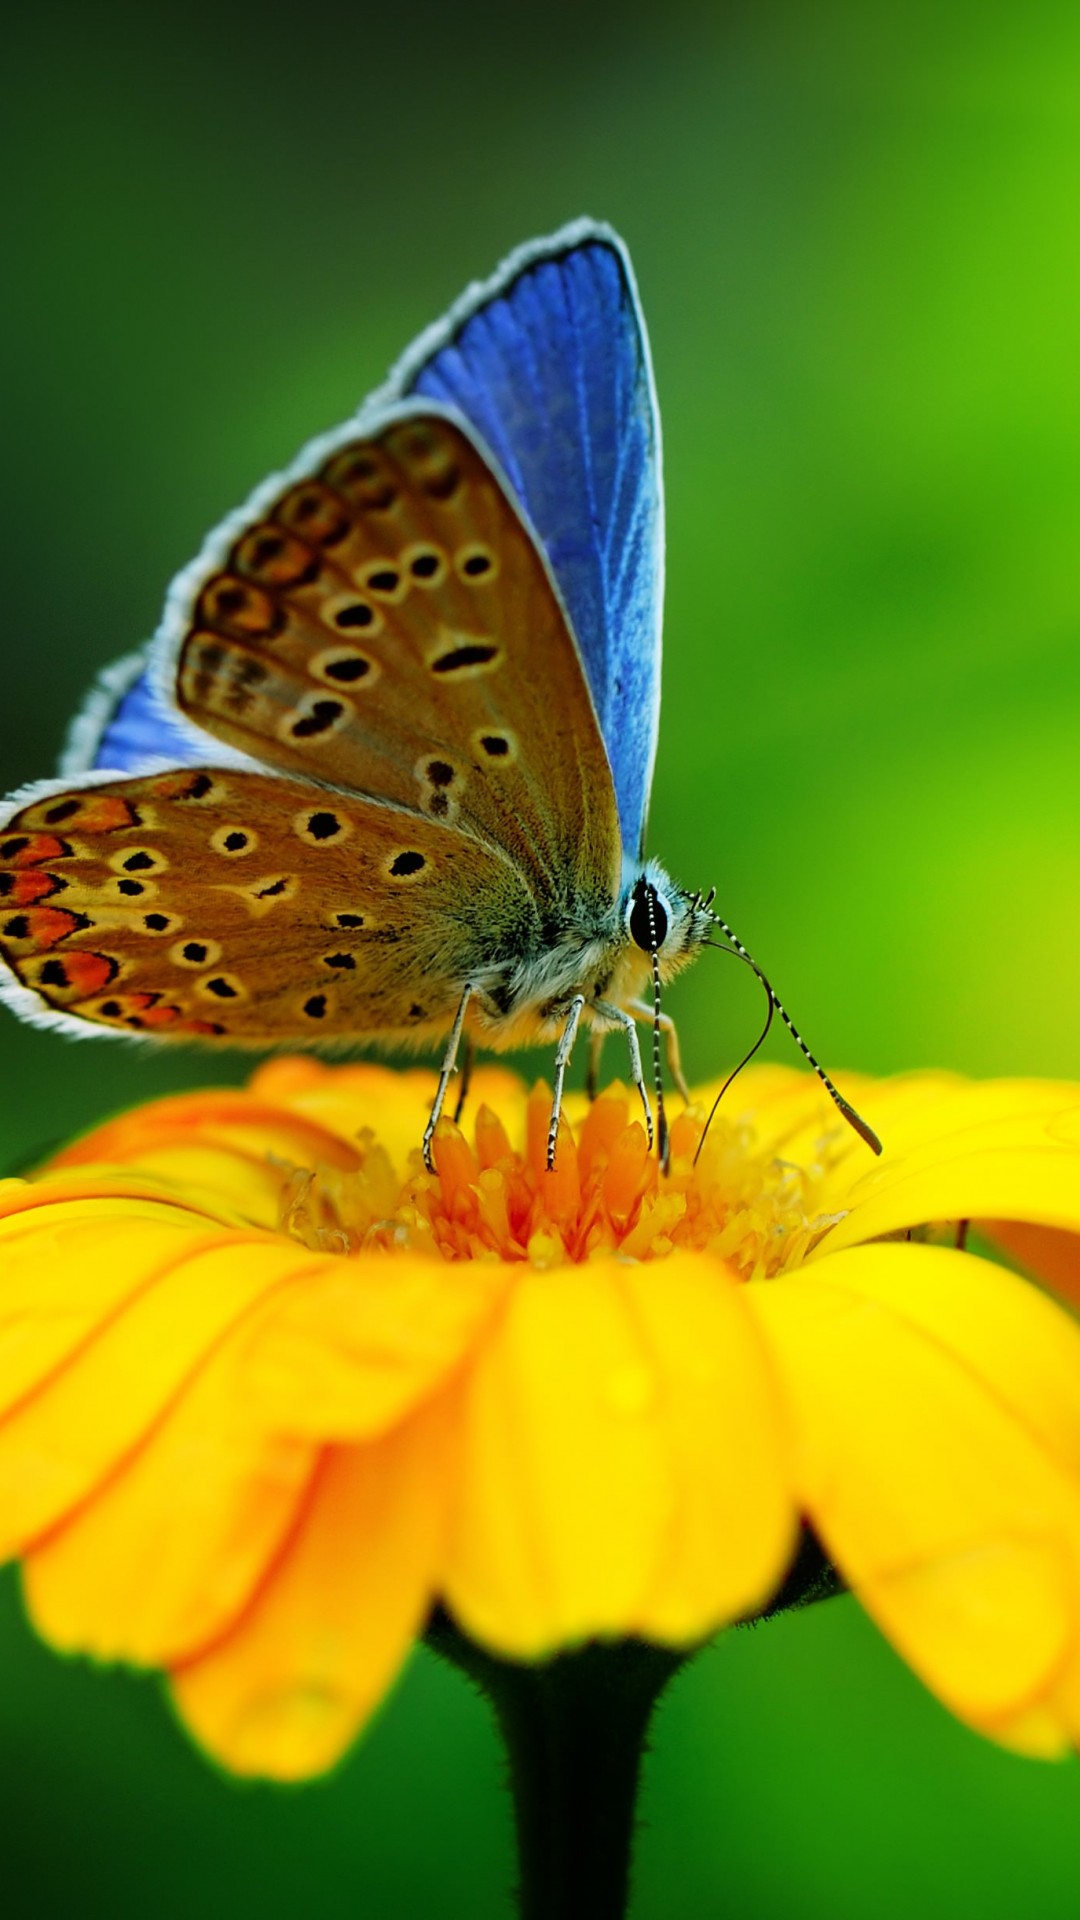 Butterfly Collecting Pollen Wallpaper for Motorola Moto X